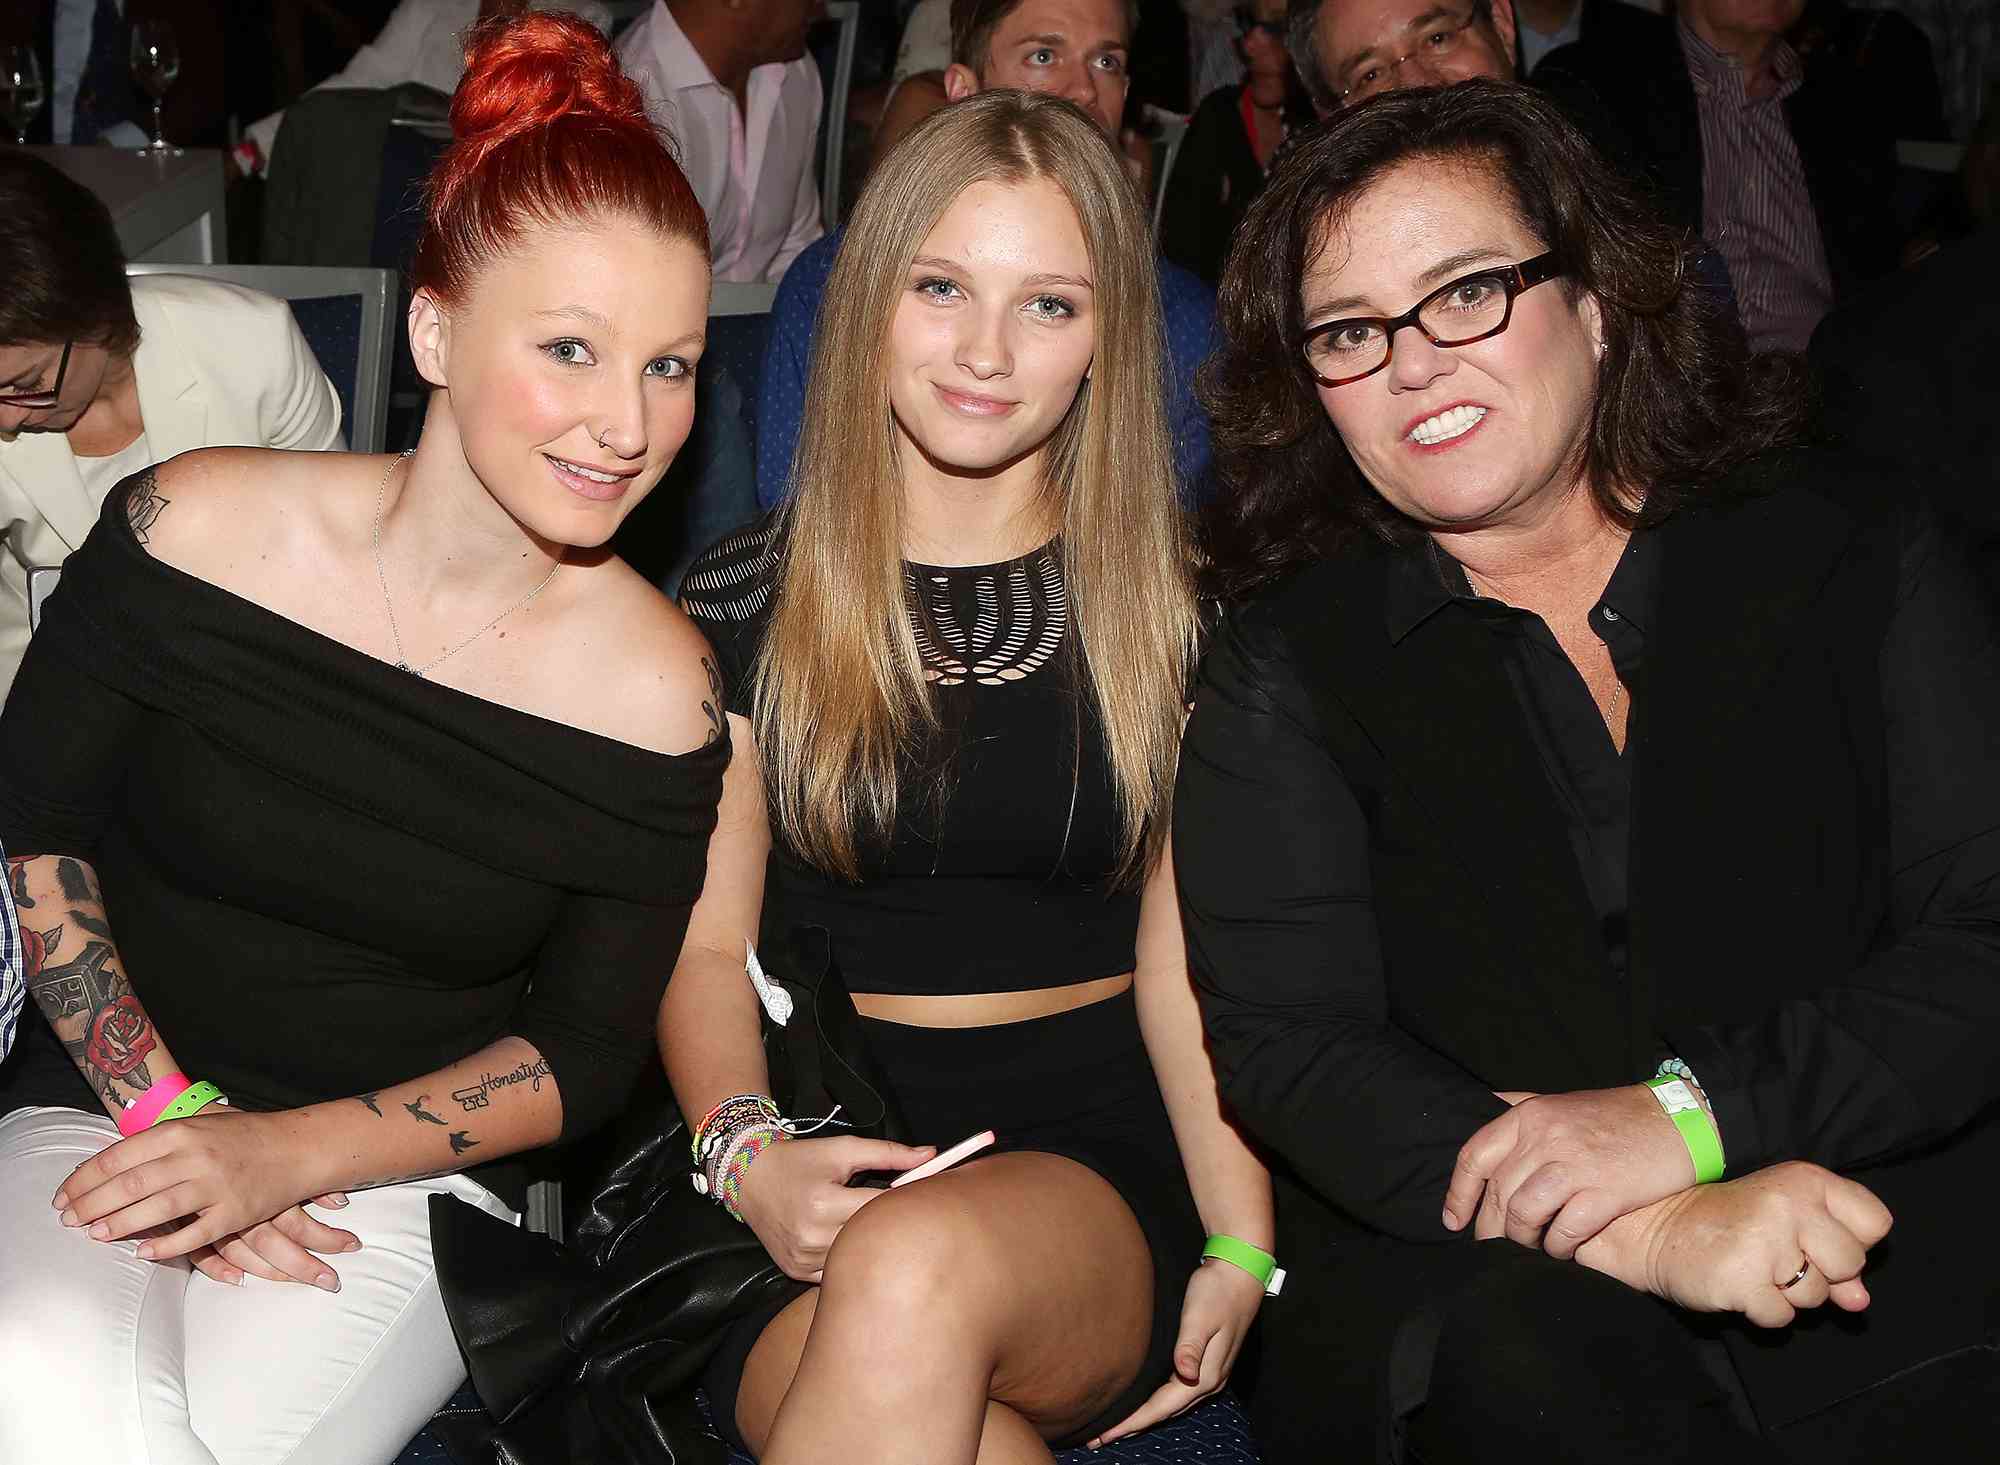 Chelsea Belle O'Donnell, Vivienne Rose O'Donnell and mother Rosie O'Donnell pose at the "2nd Annual Fran Drescher Cancer Schmancer Sunset Cabaret Cruise" on The SS Hornblower Infinity Crusie Ship on June 20, 2016 in New York City